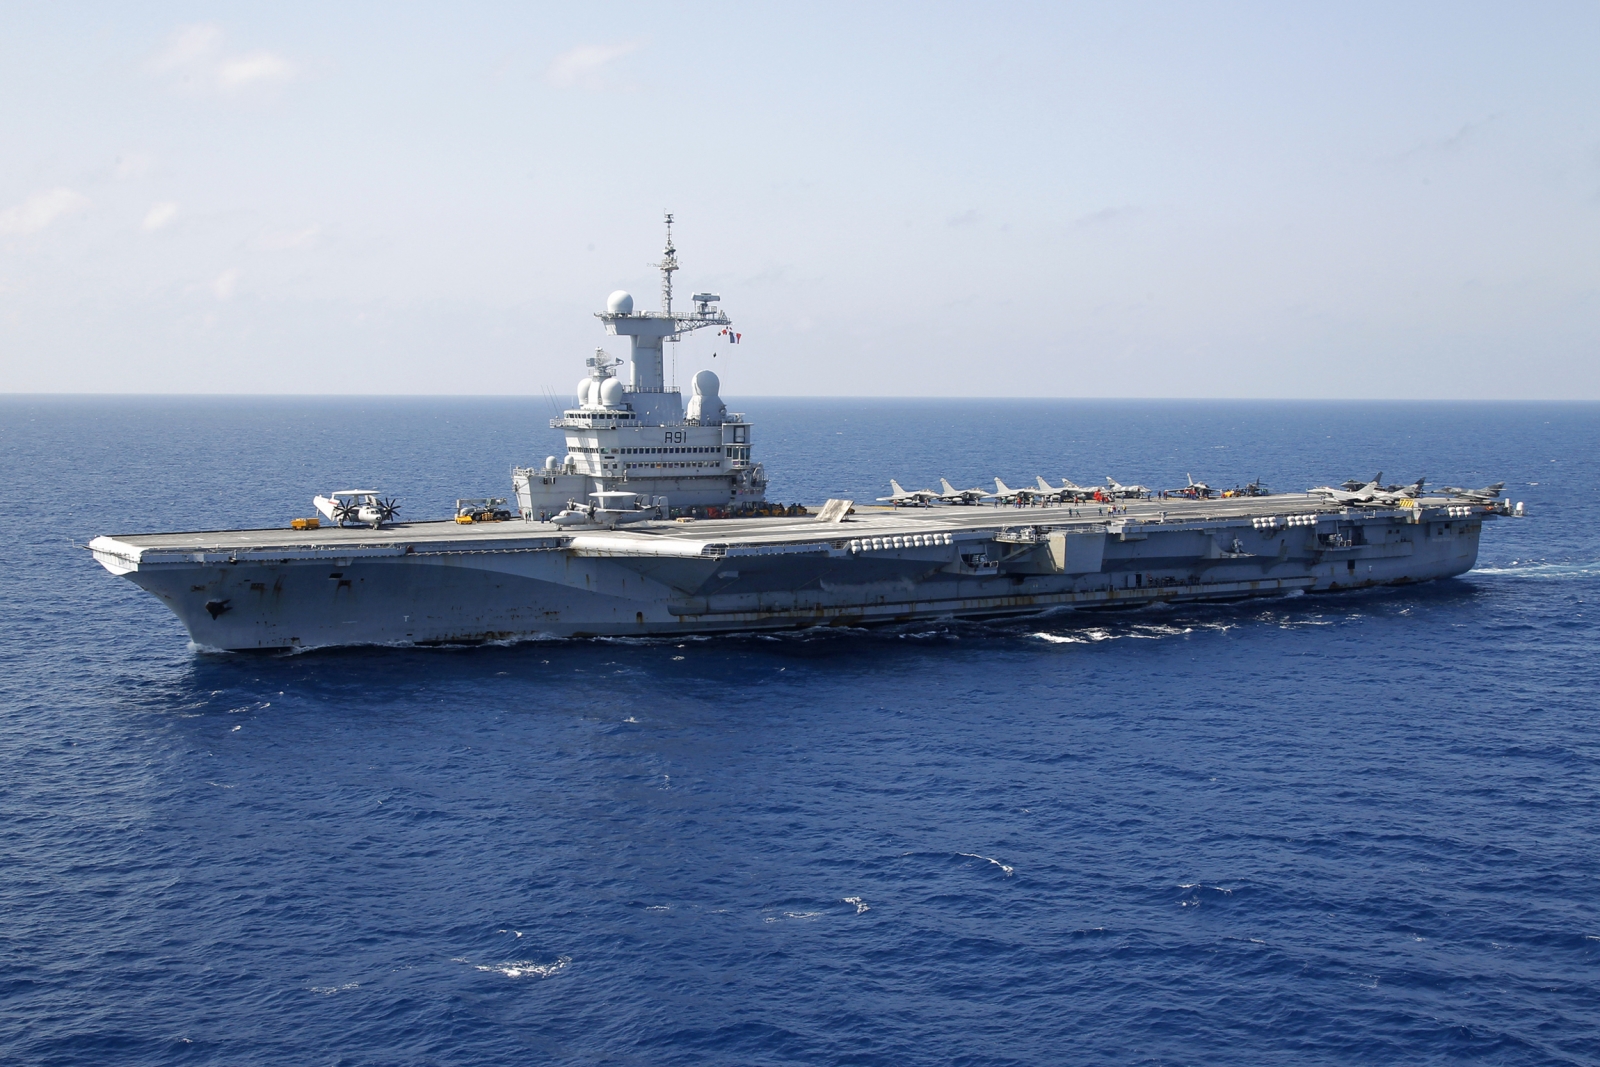 Frances Charles de Gaulle aircraft carrier ISIS Charlie Hebdo